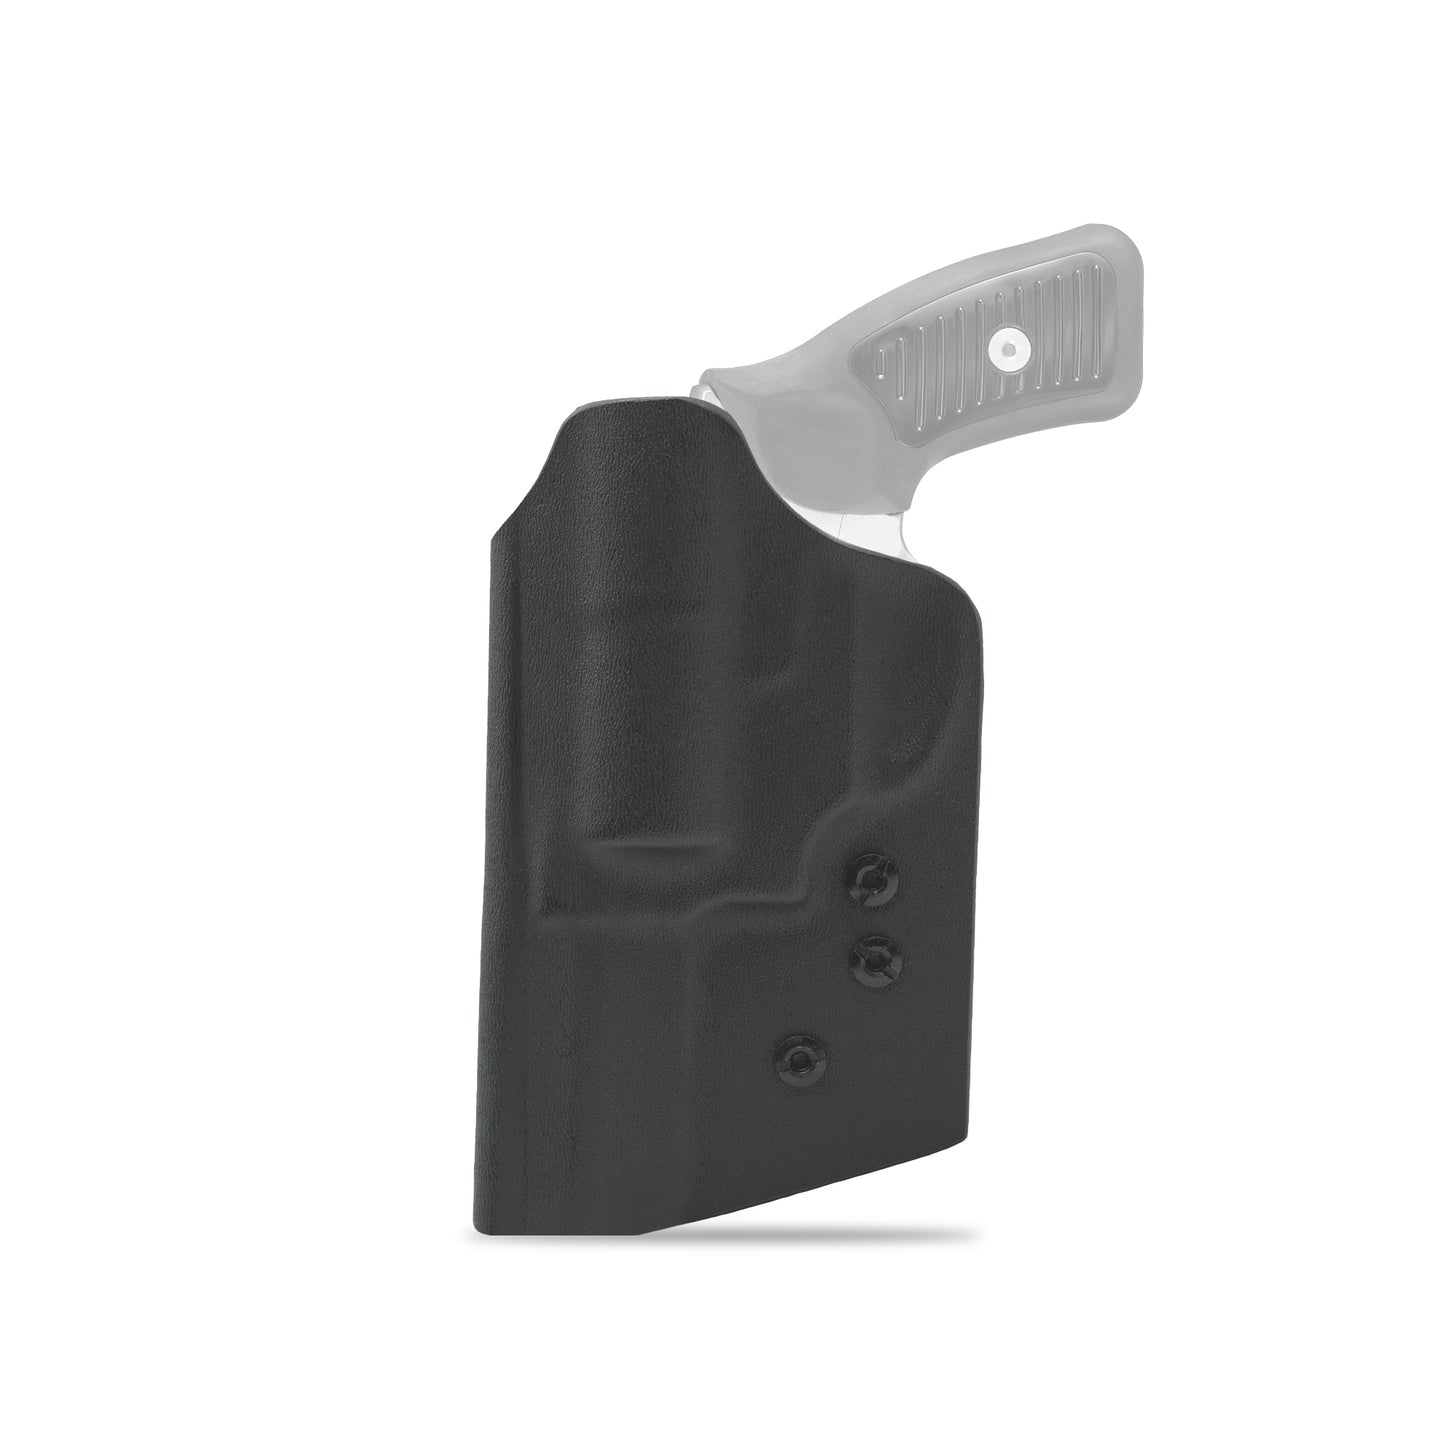 IWB Holster for the Ruger SP101 2"